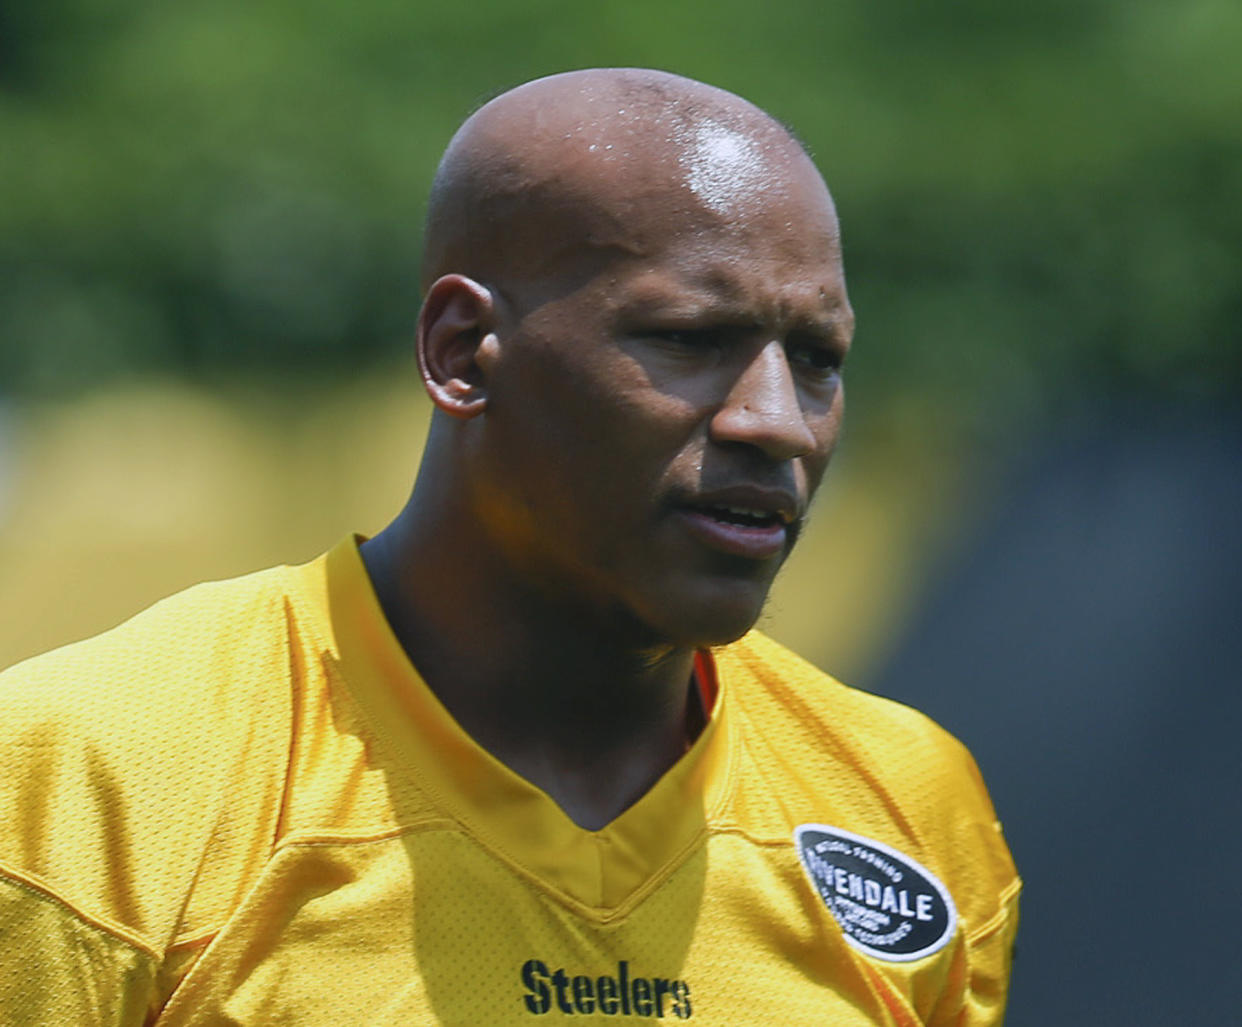 Injured linebacker Ryan Shazier is rehabbing, but won’t play in 2018. (AP)